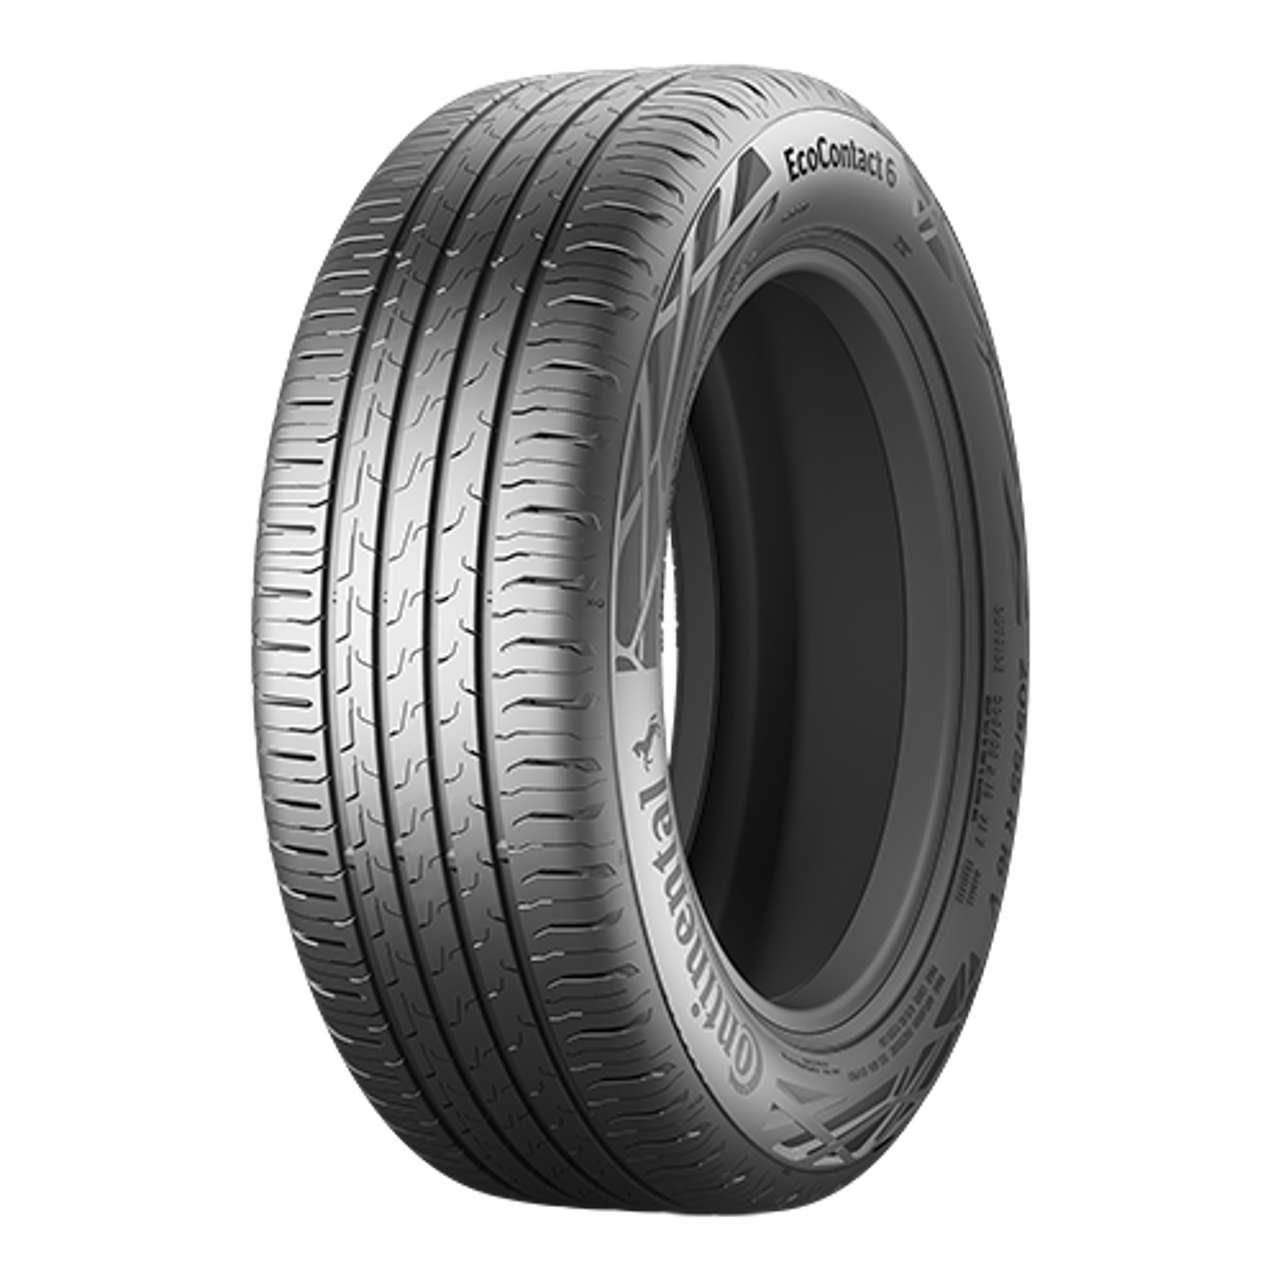 CONTINENTAL ECOCONTACT 6Q (EVc) 235/45R21 101T FR BSW XL